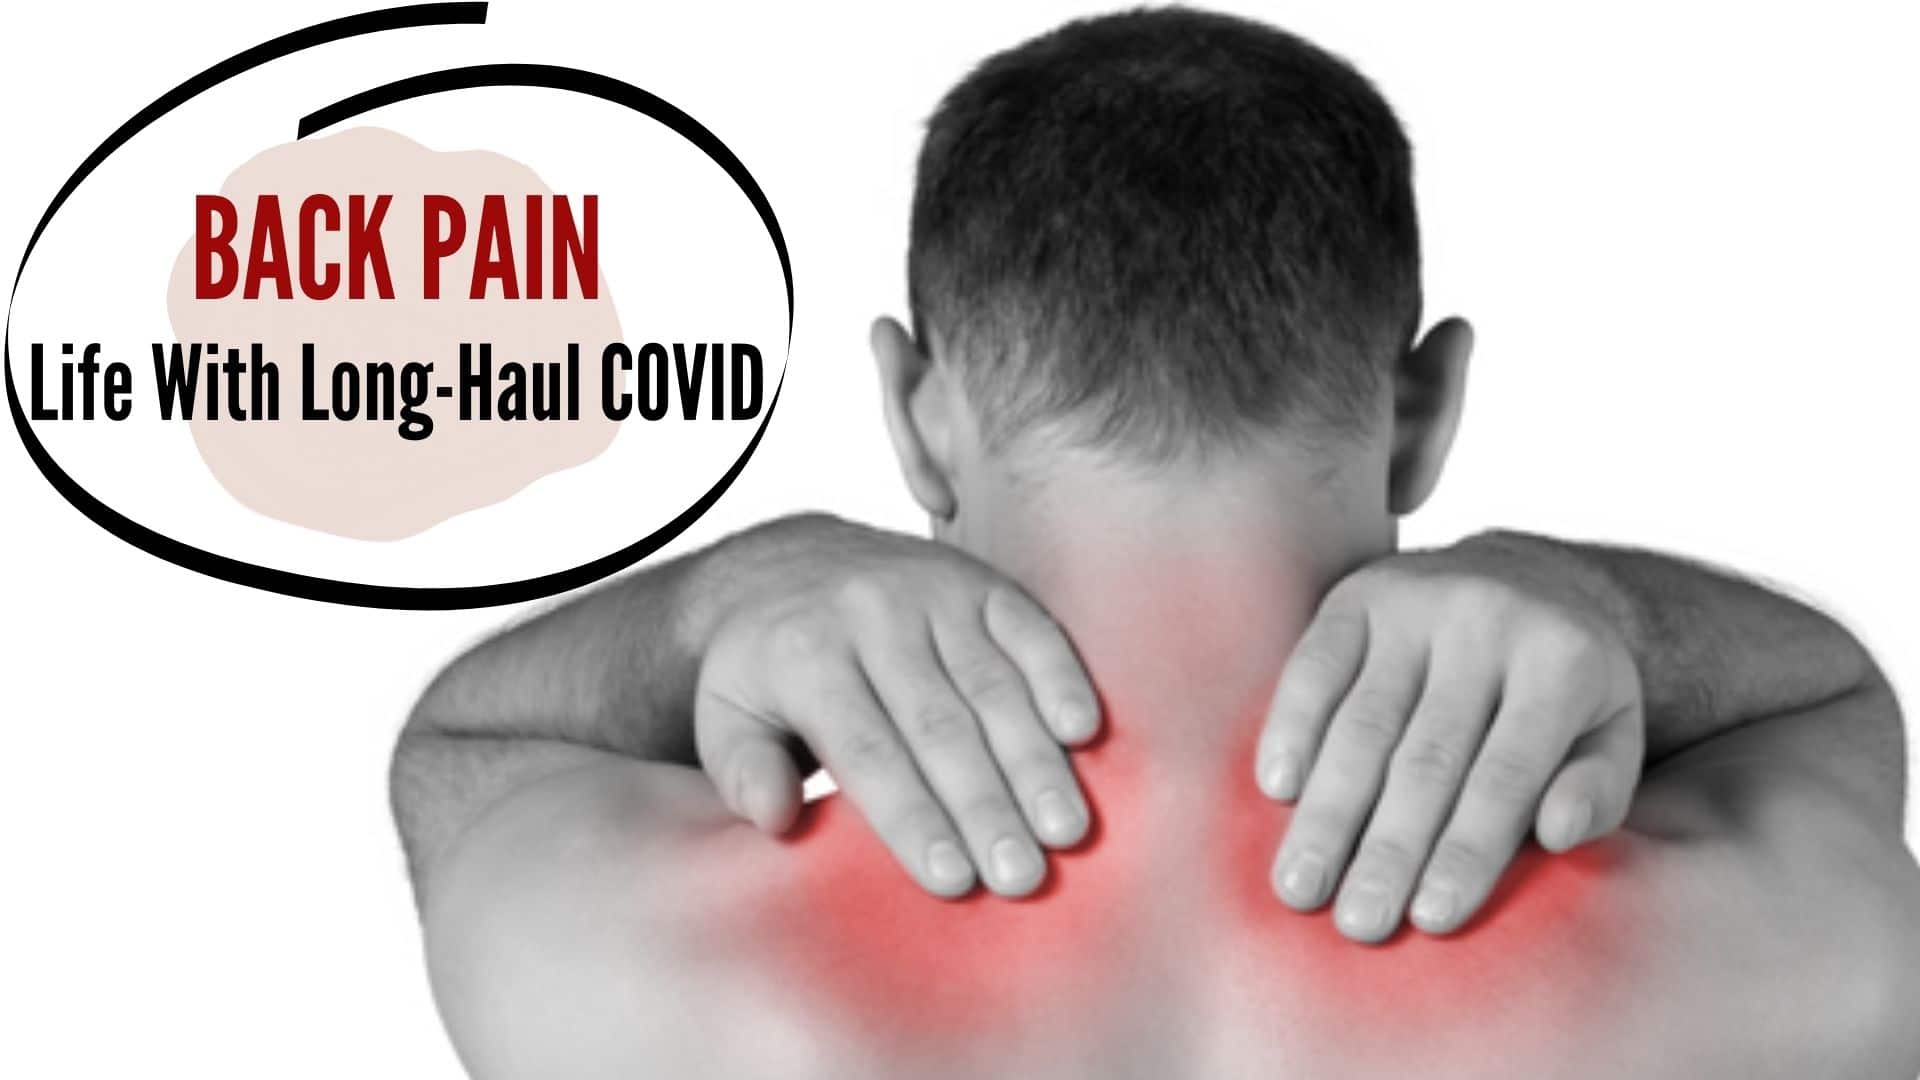 Symptoms Of Long-COVID - Back Pain Could Be A Warning Sign Of Post-Coronavirus Recovery